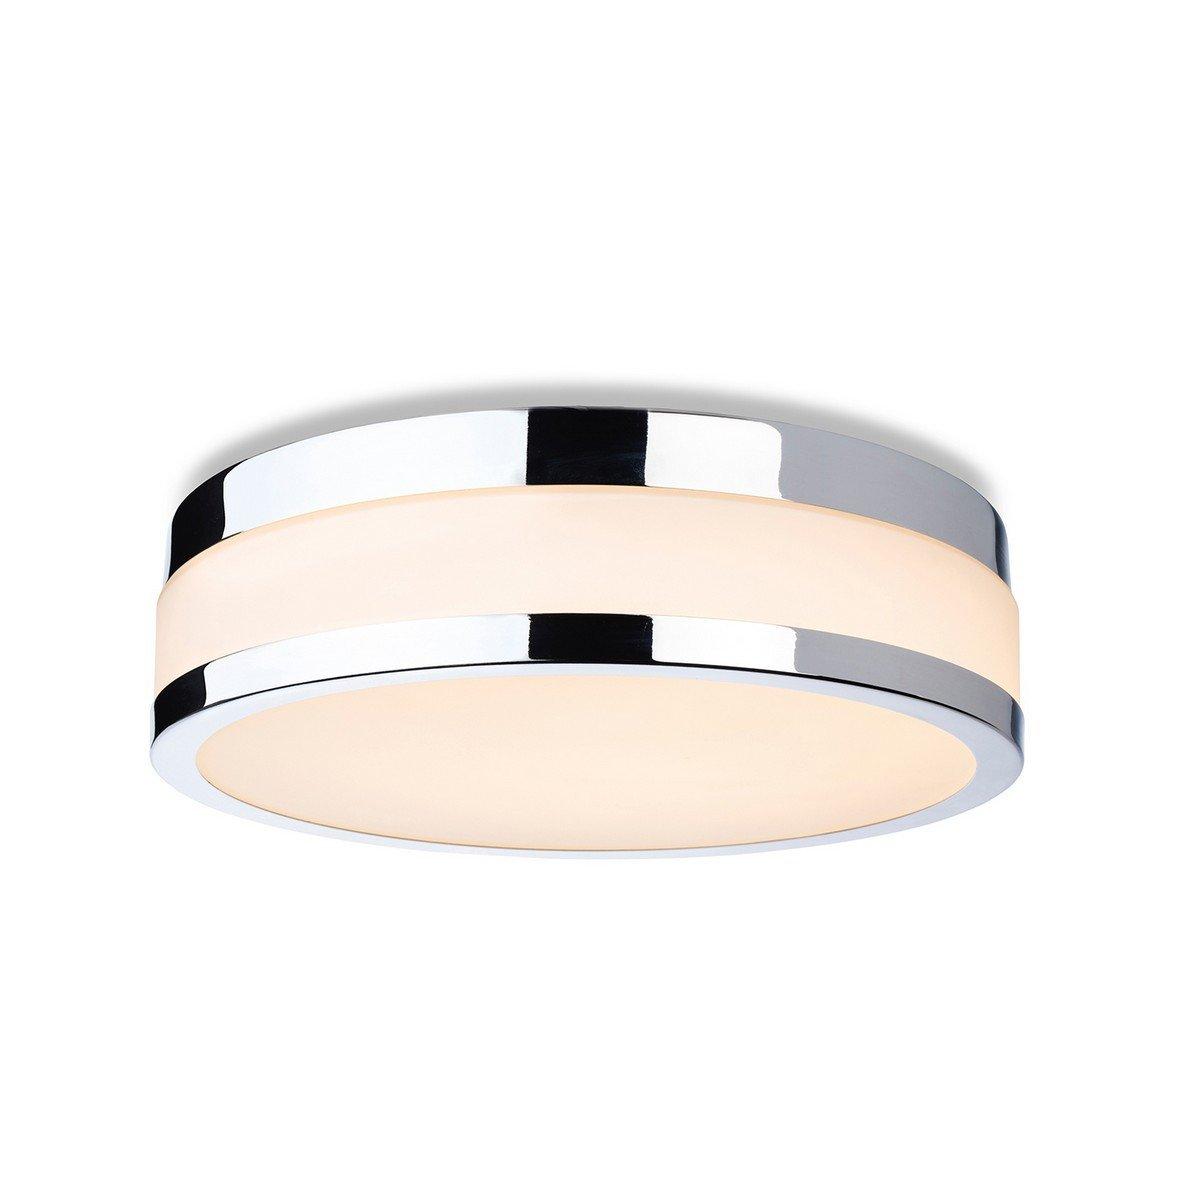 Marnie 290cm LED Flush Ceiling Fitting Chrome with Opal White Glass IP44